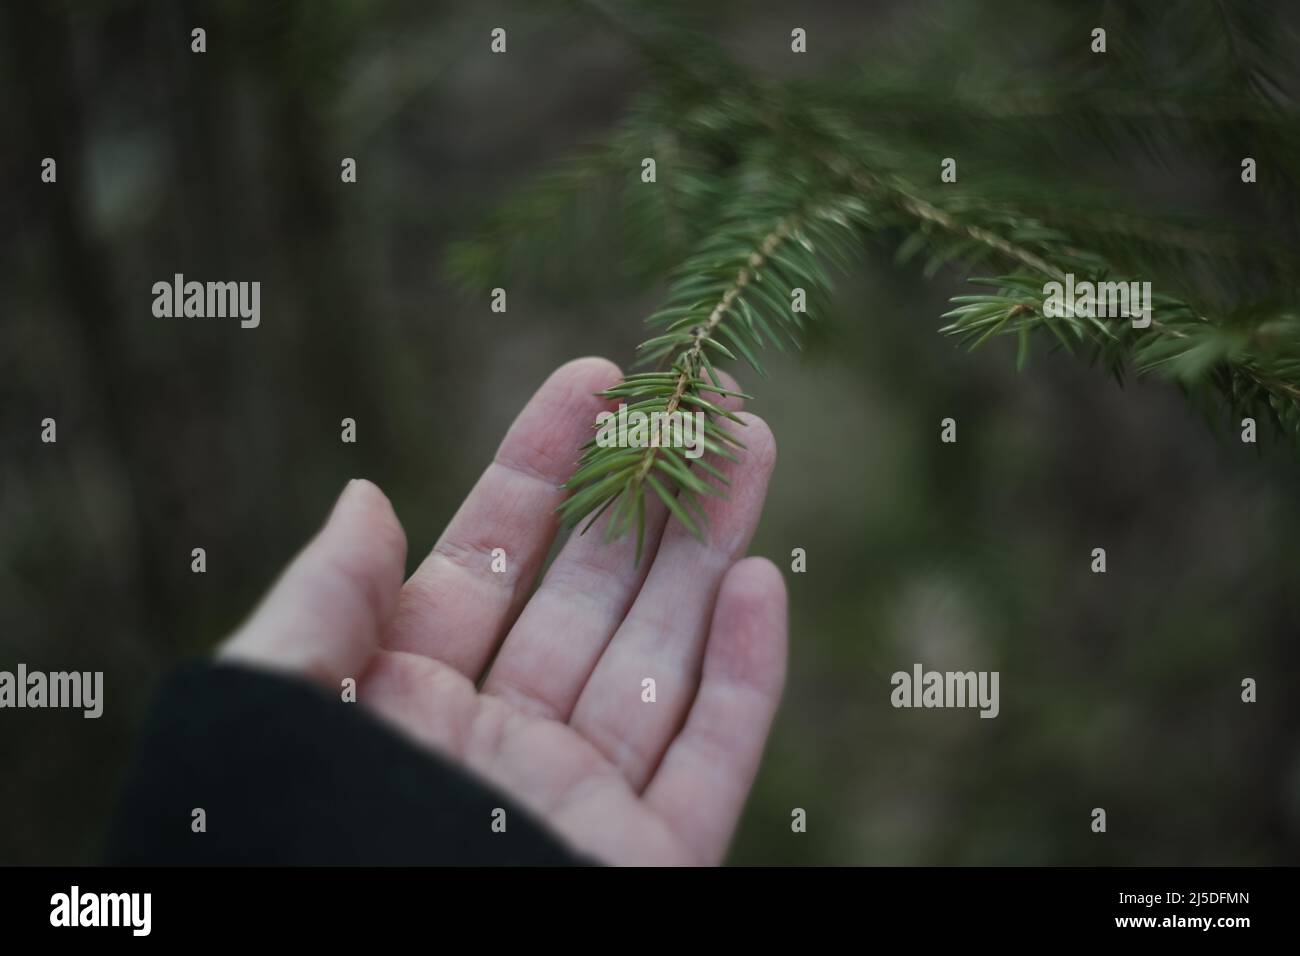 Forest care ecology, hand holding fir tree branch. Fluffy branches of a evergreen fir trees.  Stock Photo